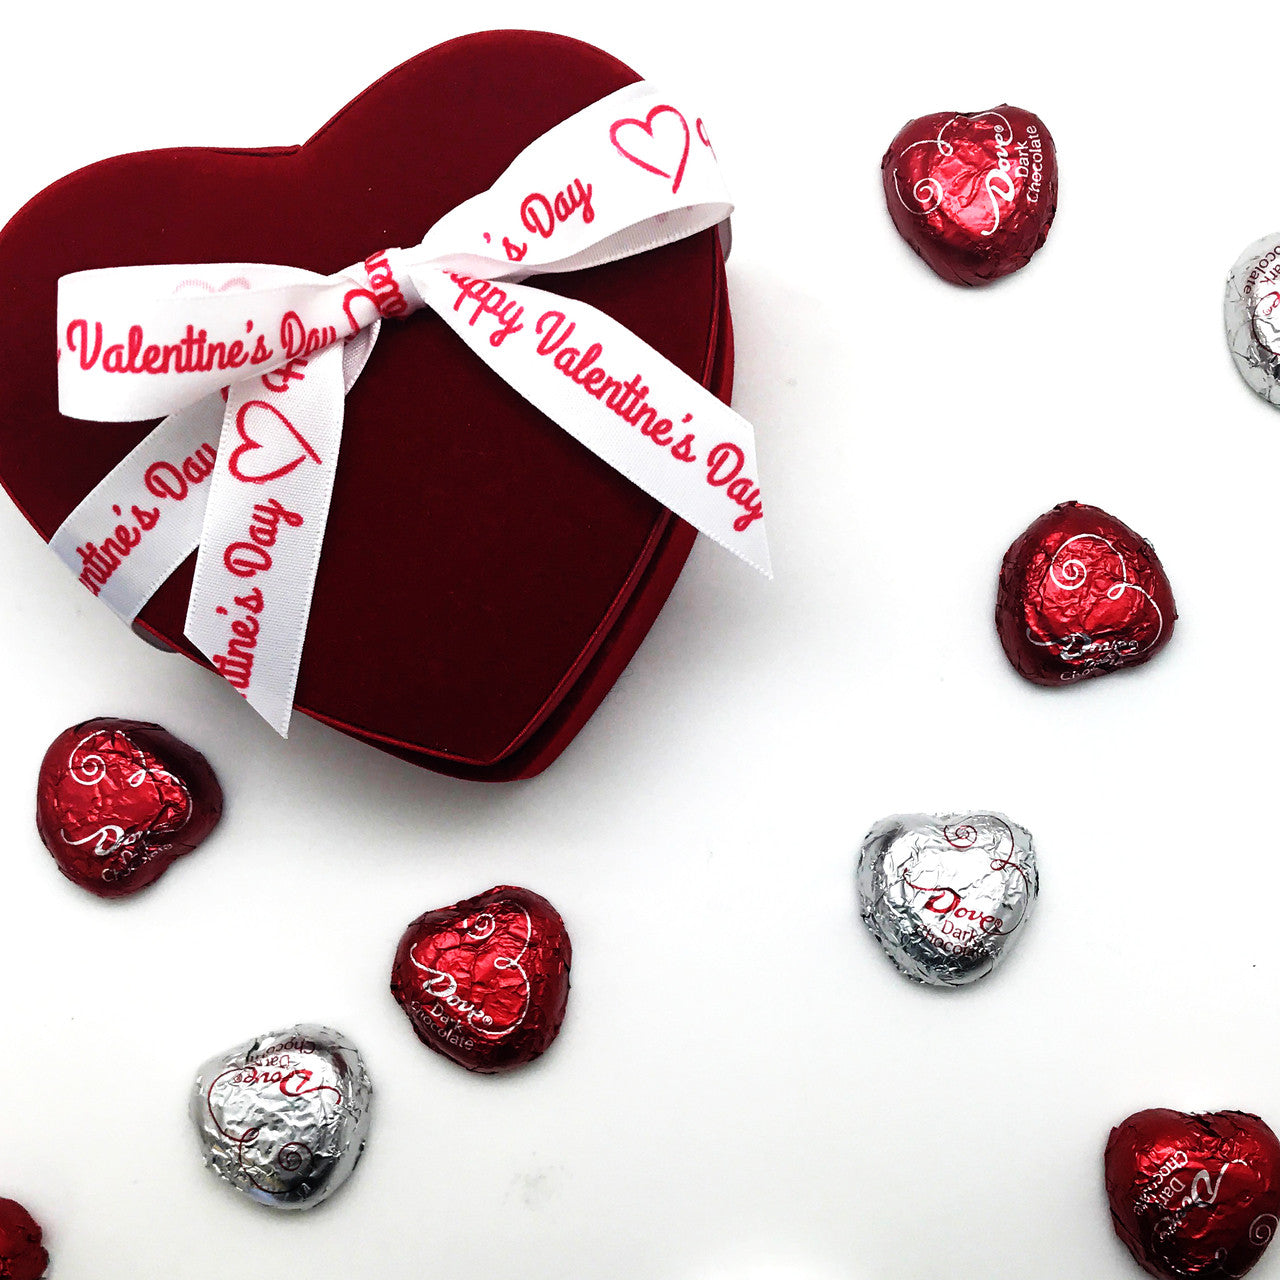 Our Happy Valentine's ribbon makes this simple red velvet chocolate box oh so elegant!